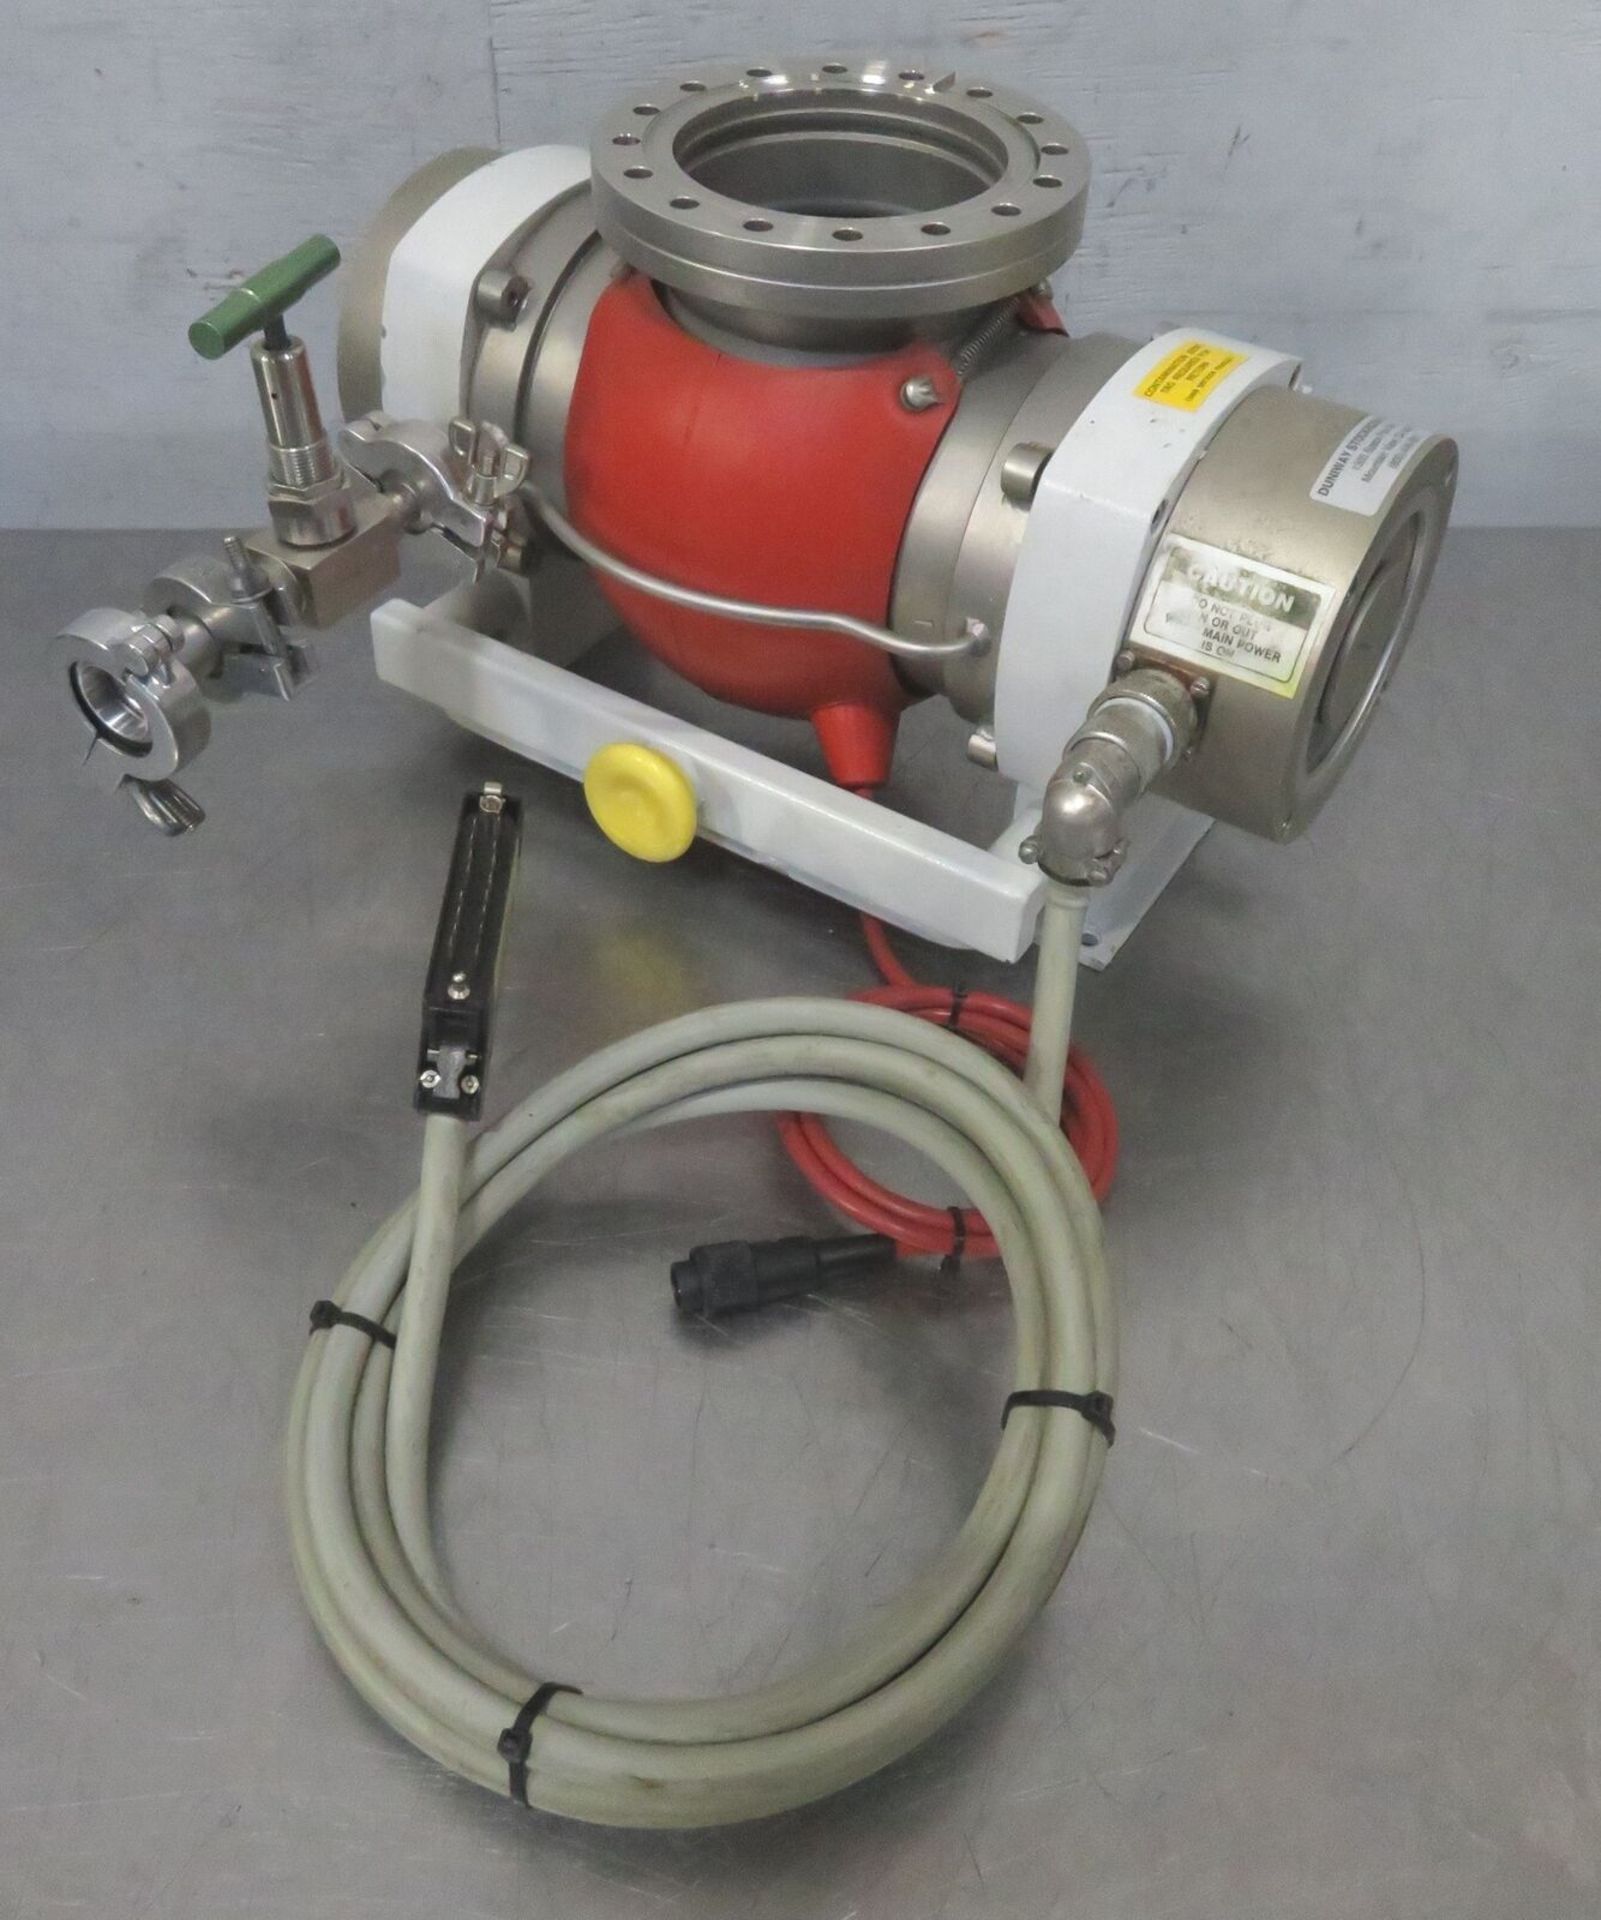 Pfeiffer Balzers TPU330 Turbo Vacuum Pump w/ 6" CF Conflat Flange, Cable - Gilroy - Image 2 of 8